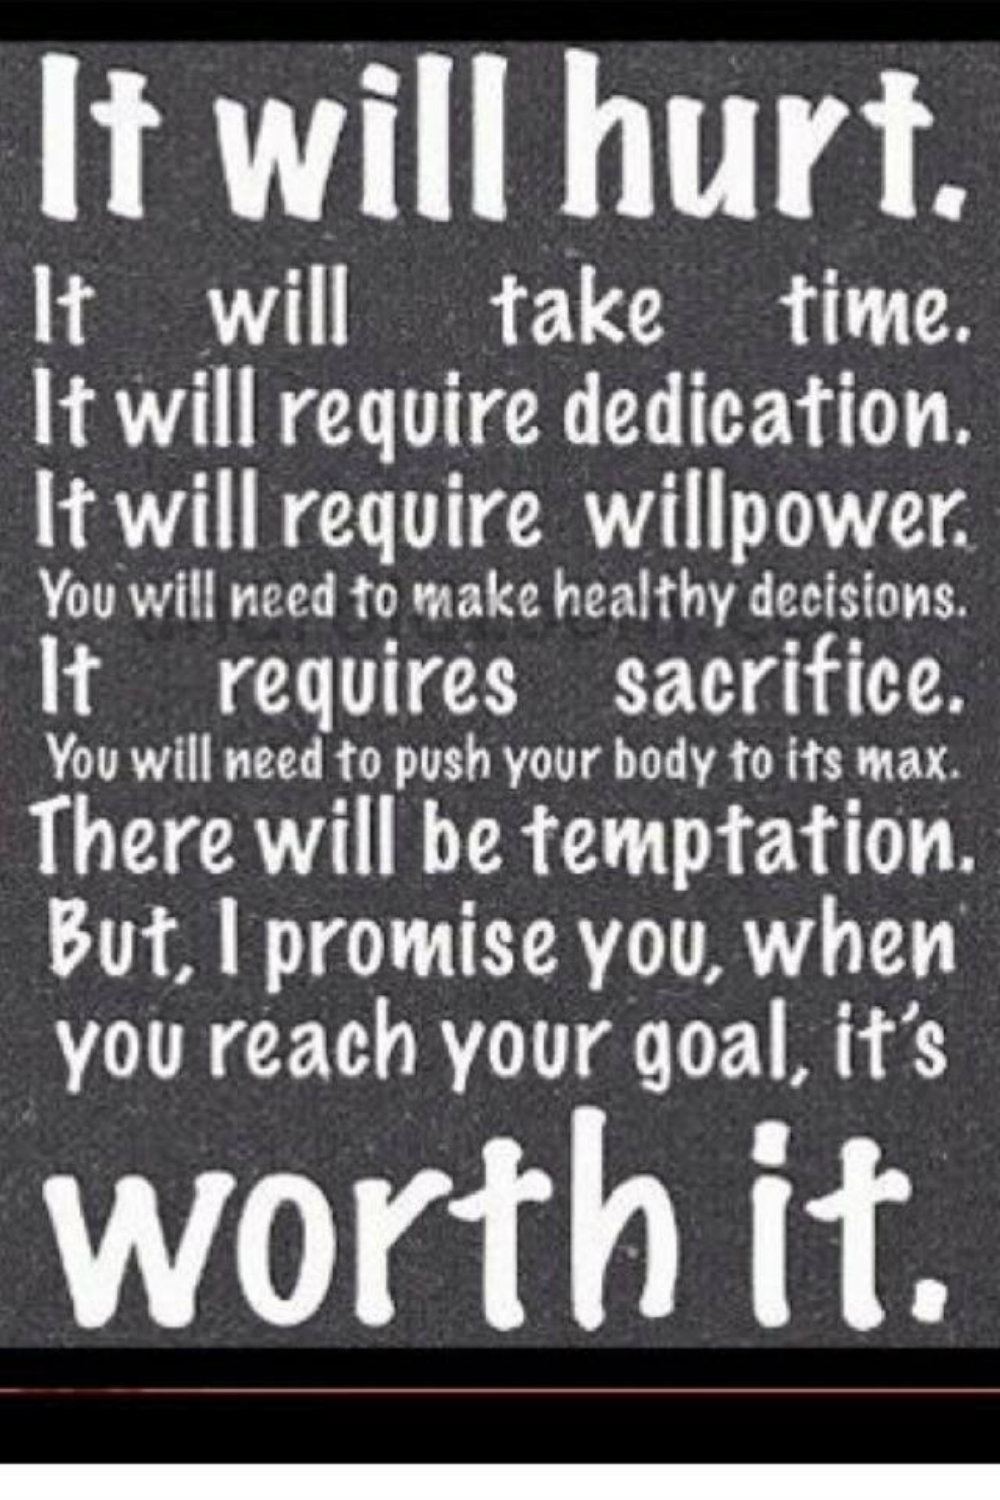 lose weight motivation quotes